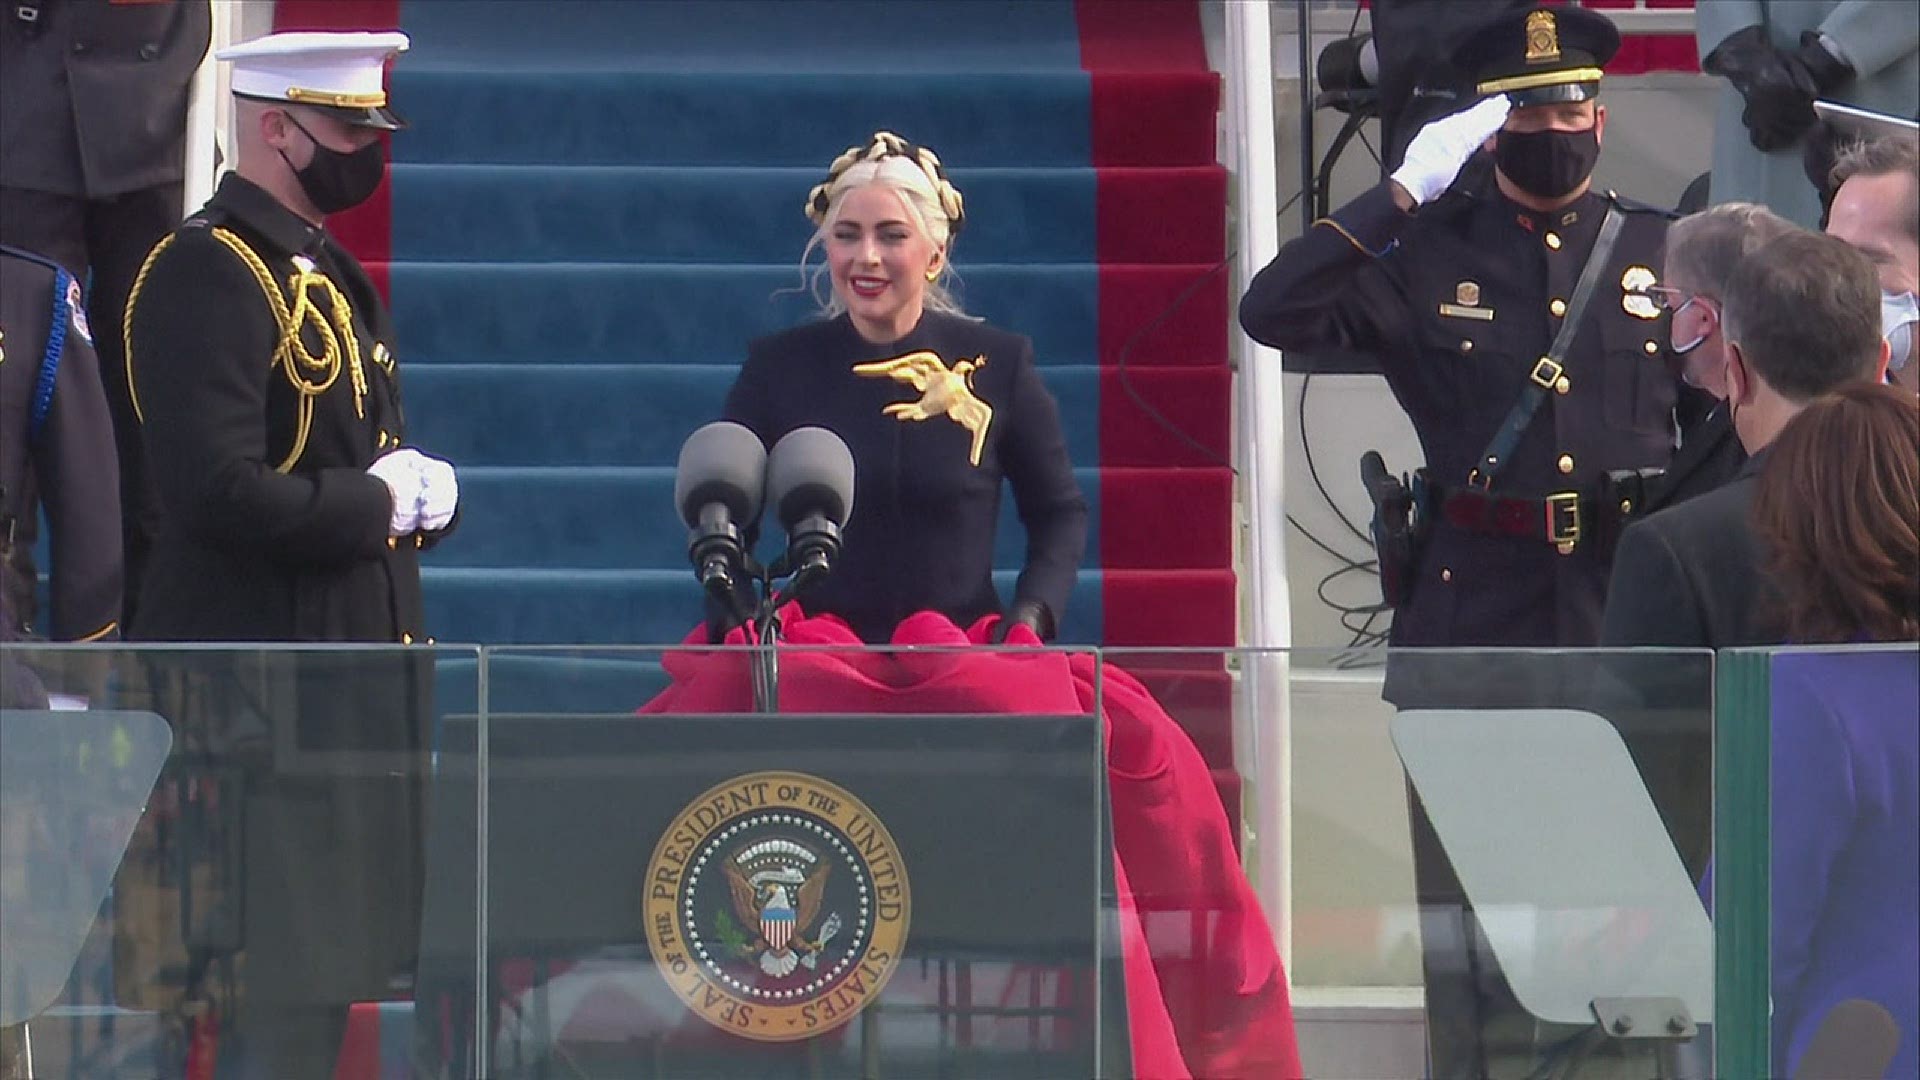 Lady Gaga performs the national anthem at the inauguration in Washington, D.C.